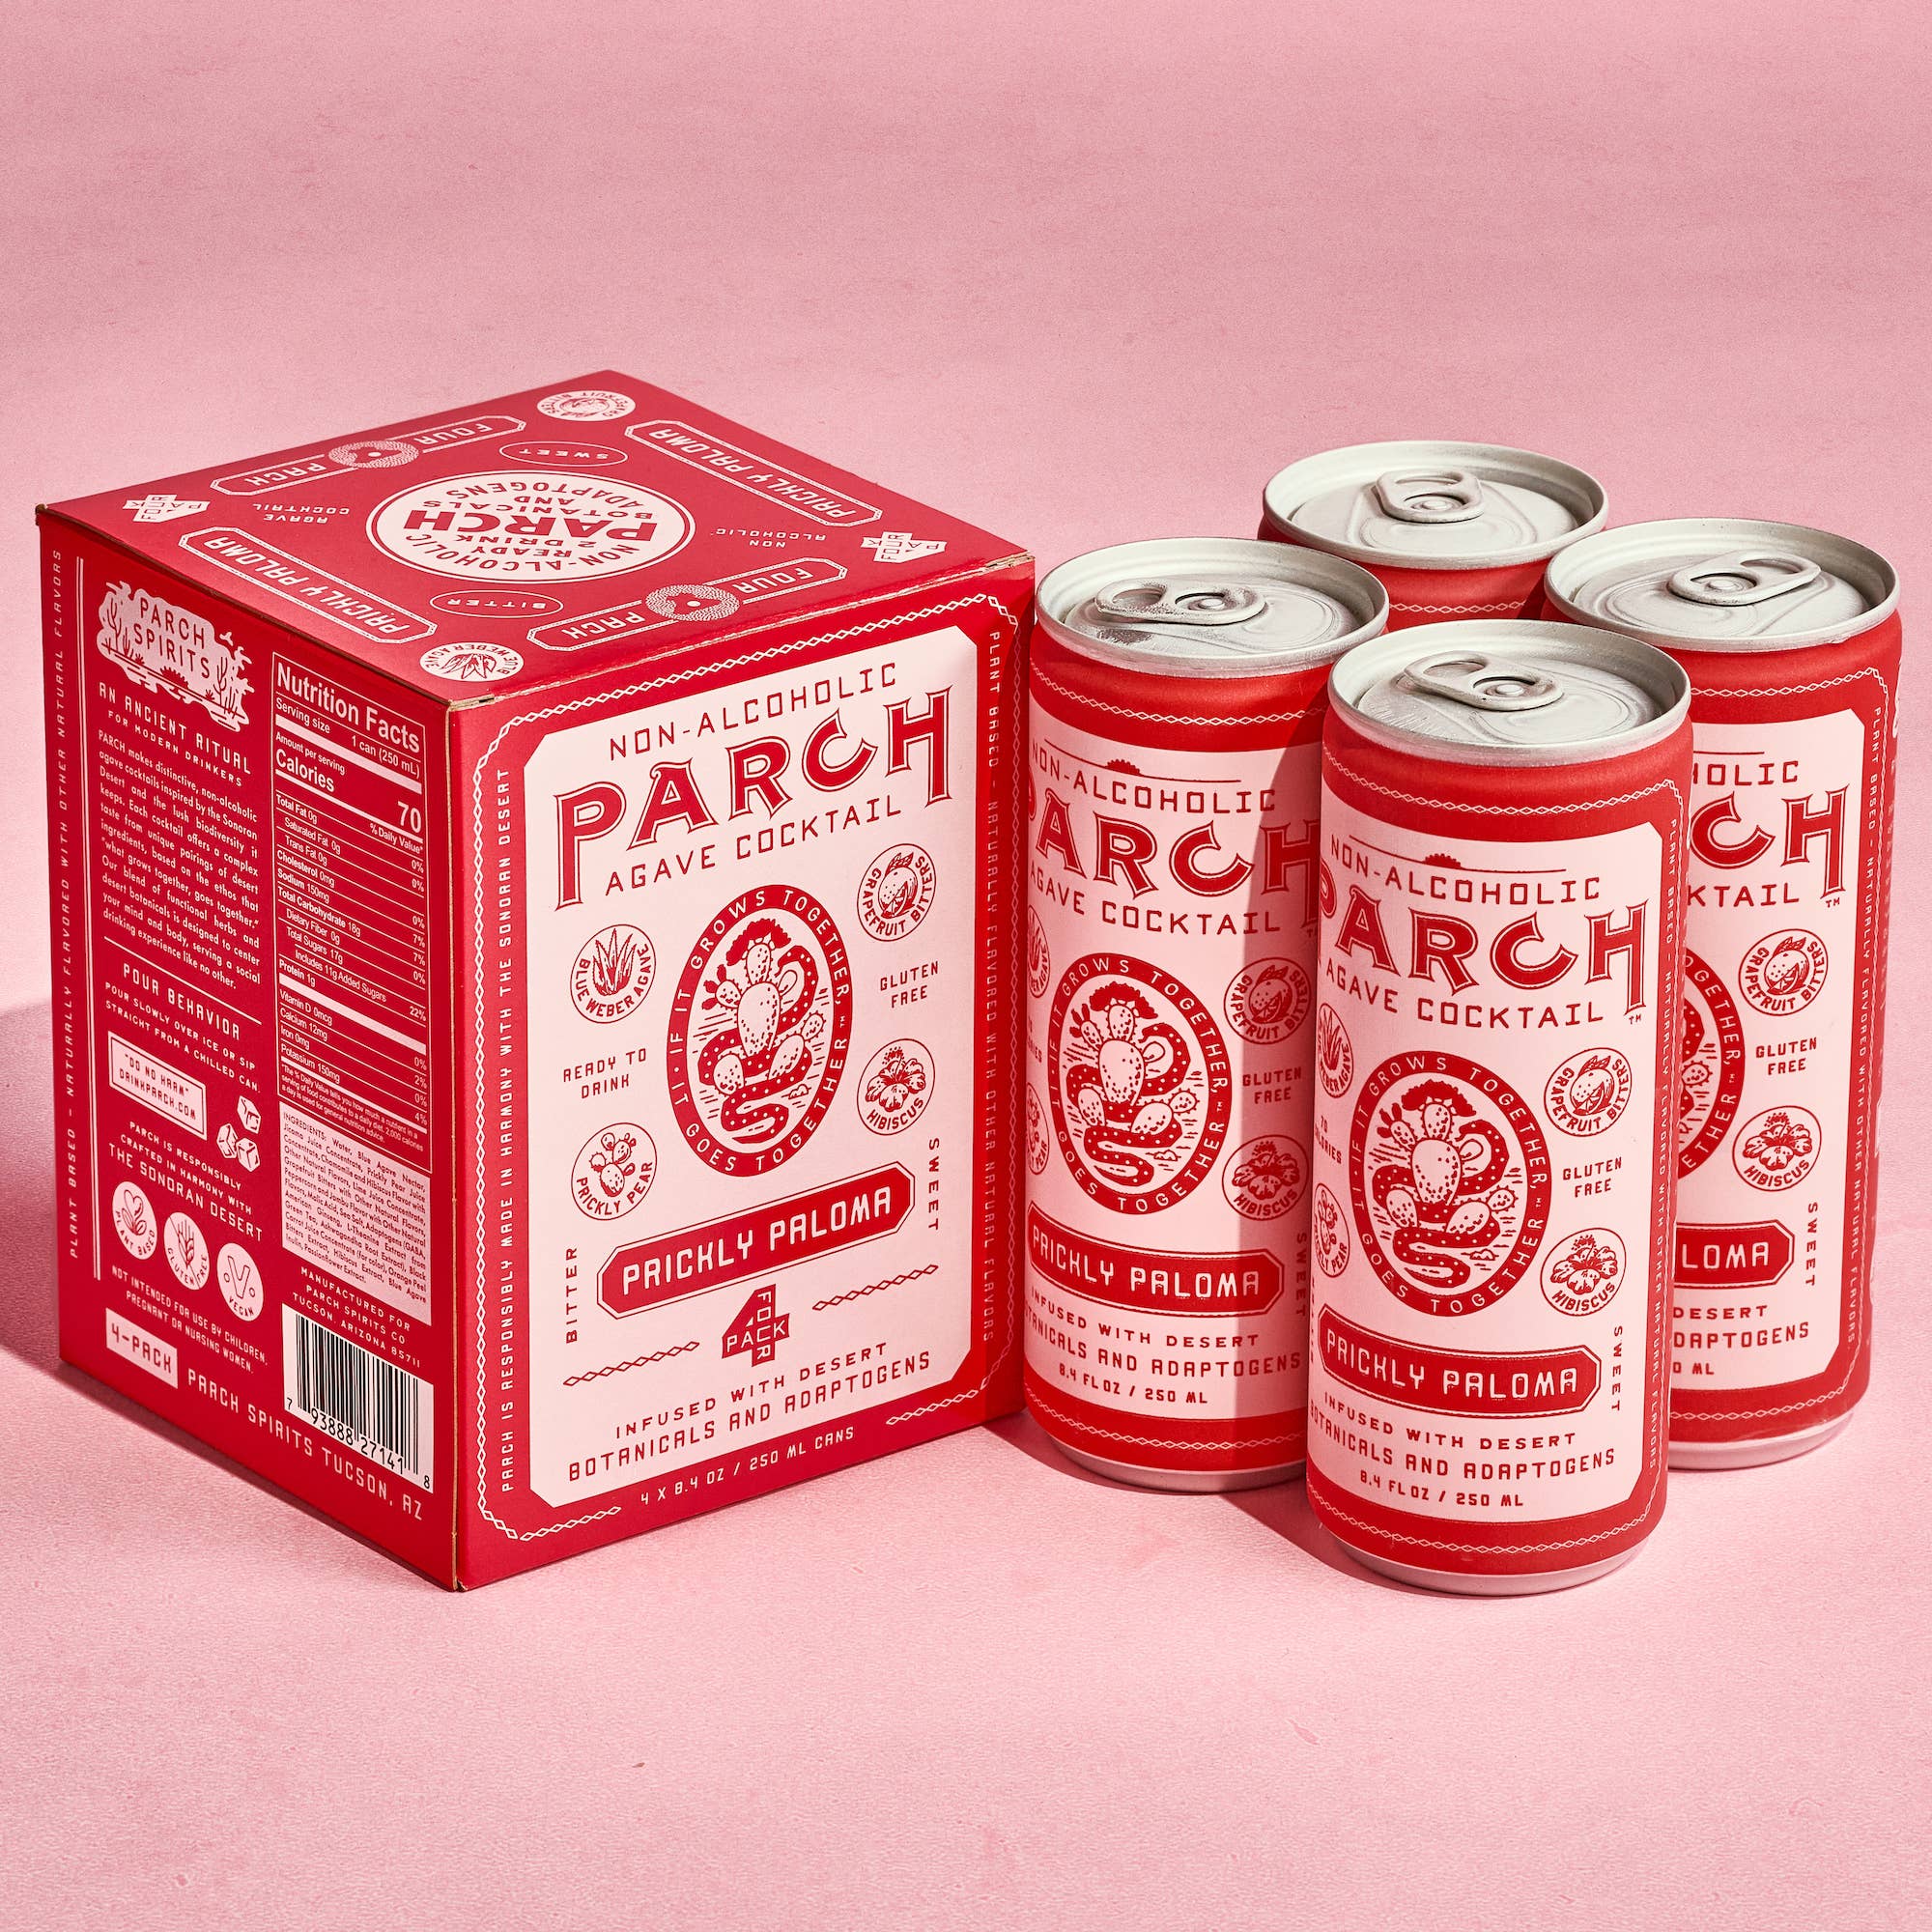 PARCH Prickly Paloma Non-Alc Agave Cocktail - 24 Cans